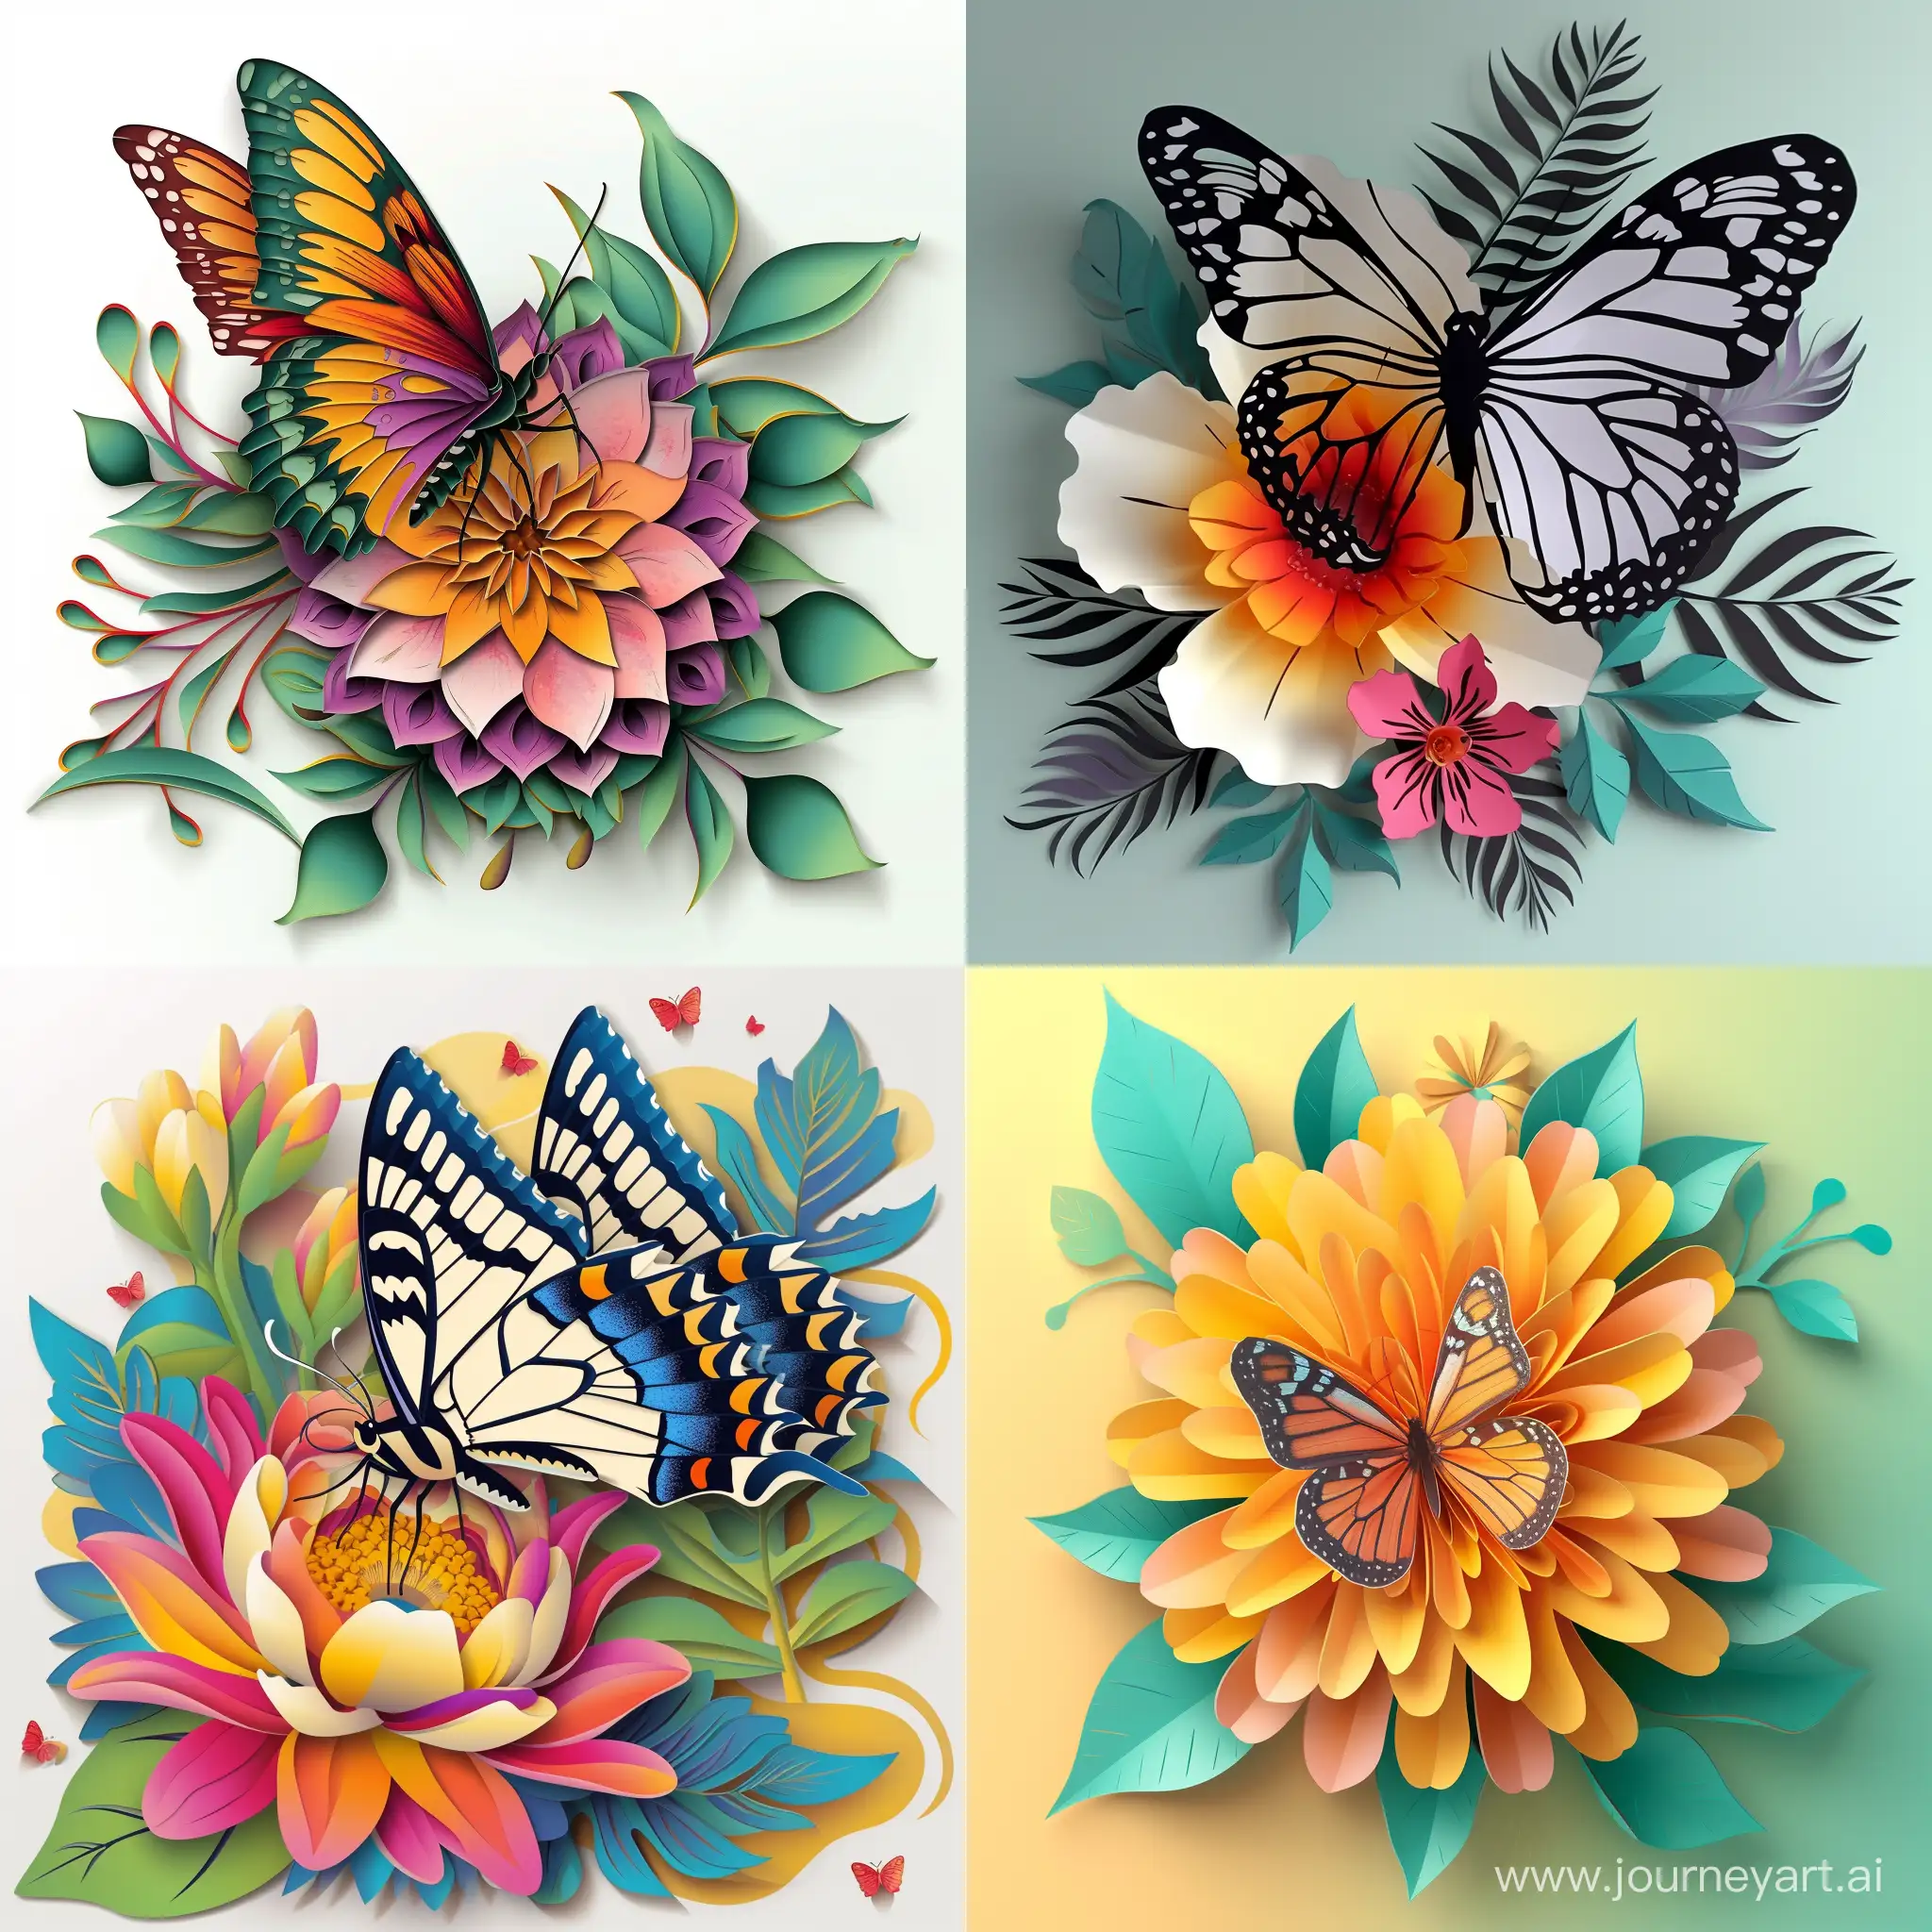 Exquisite-Butterfly-Cut-Paper-Art-on-Vibrant-Flower-HighQuality-Vector-Illustration